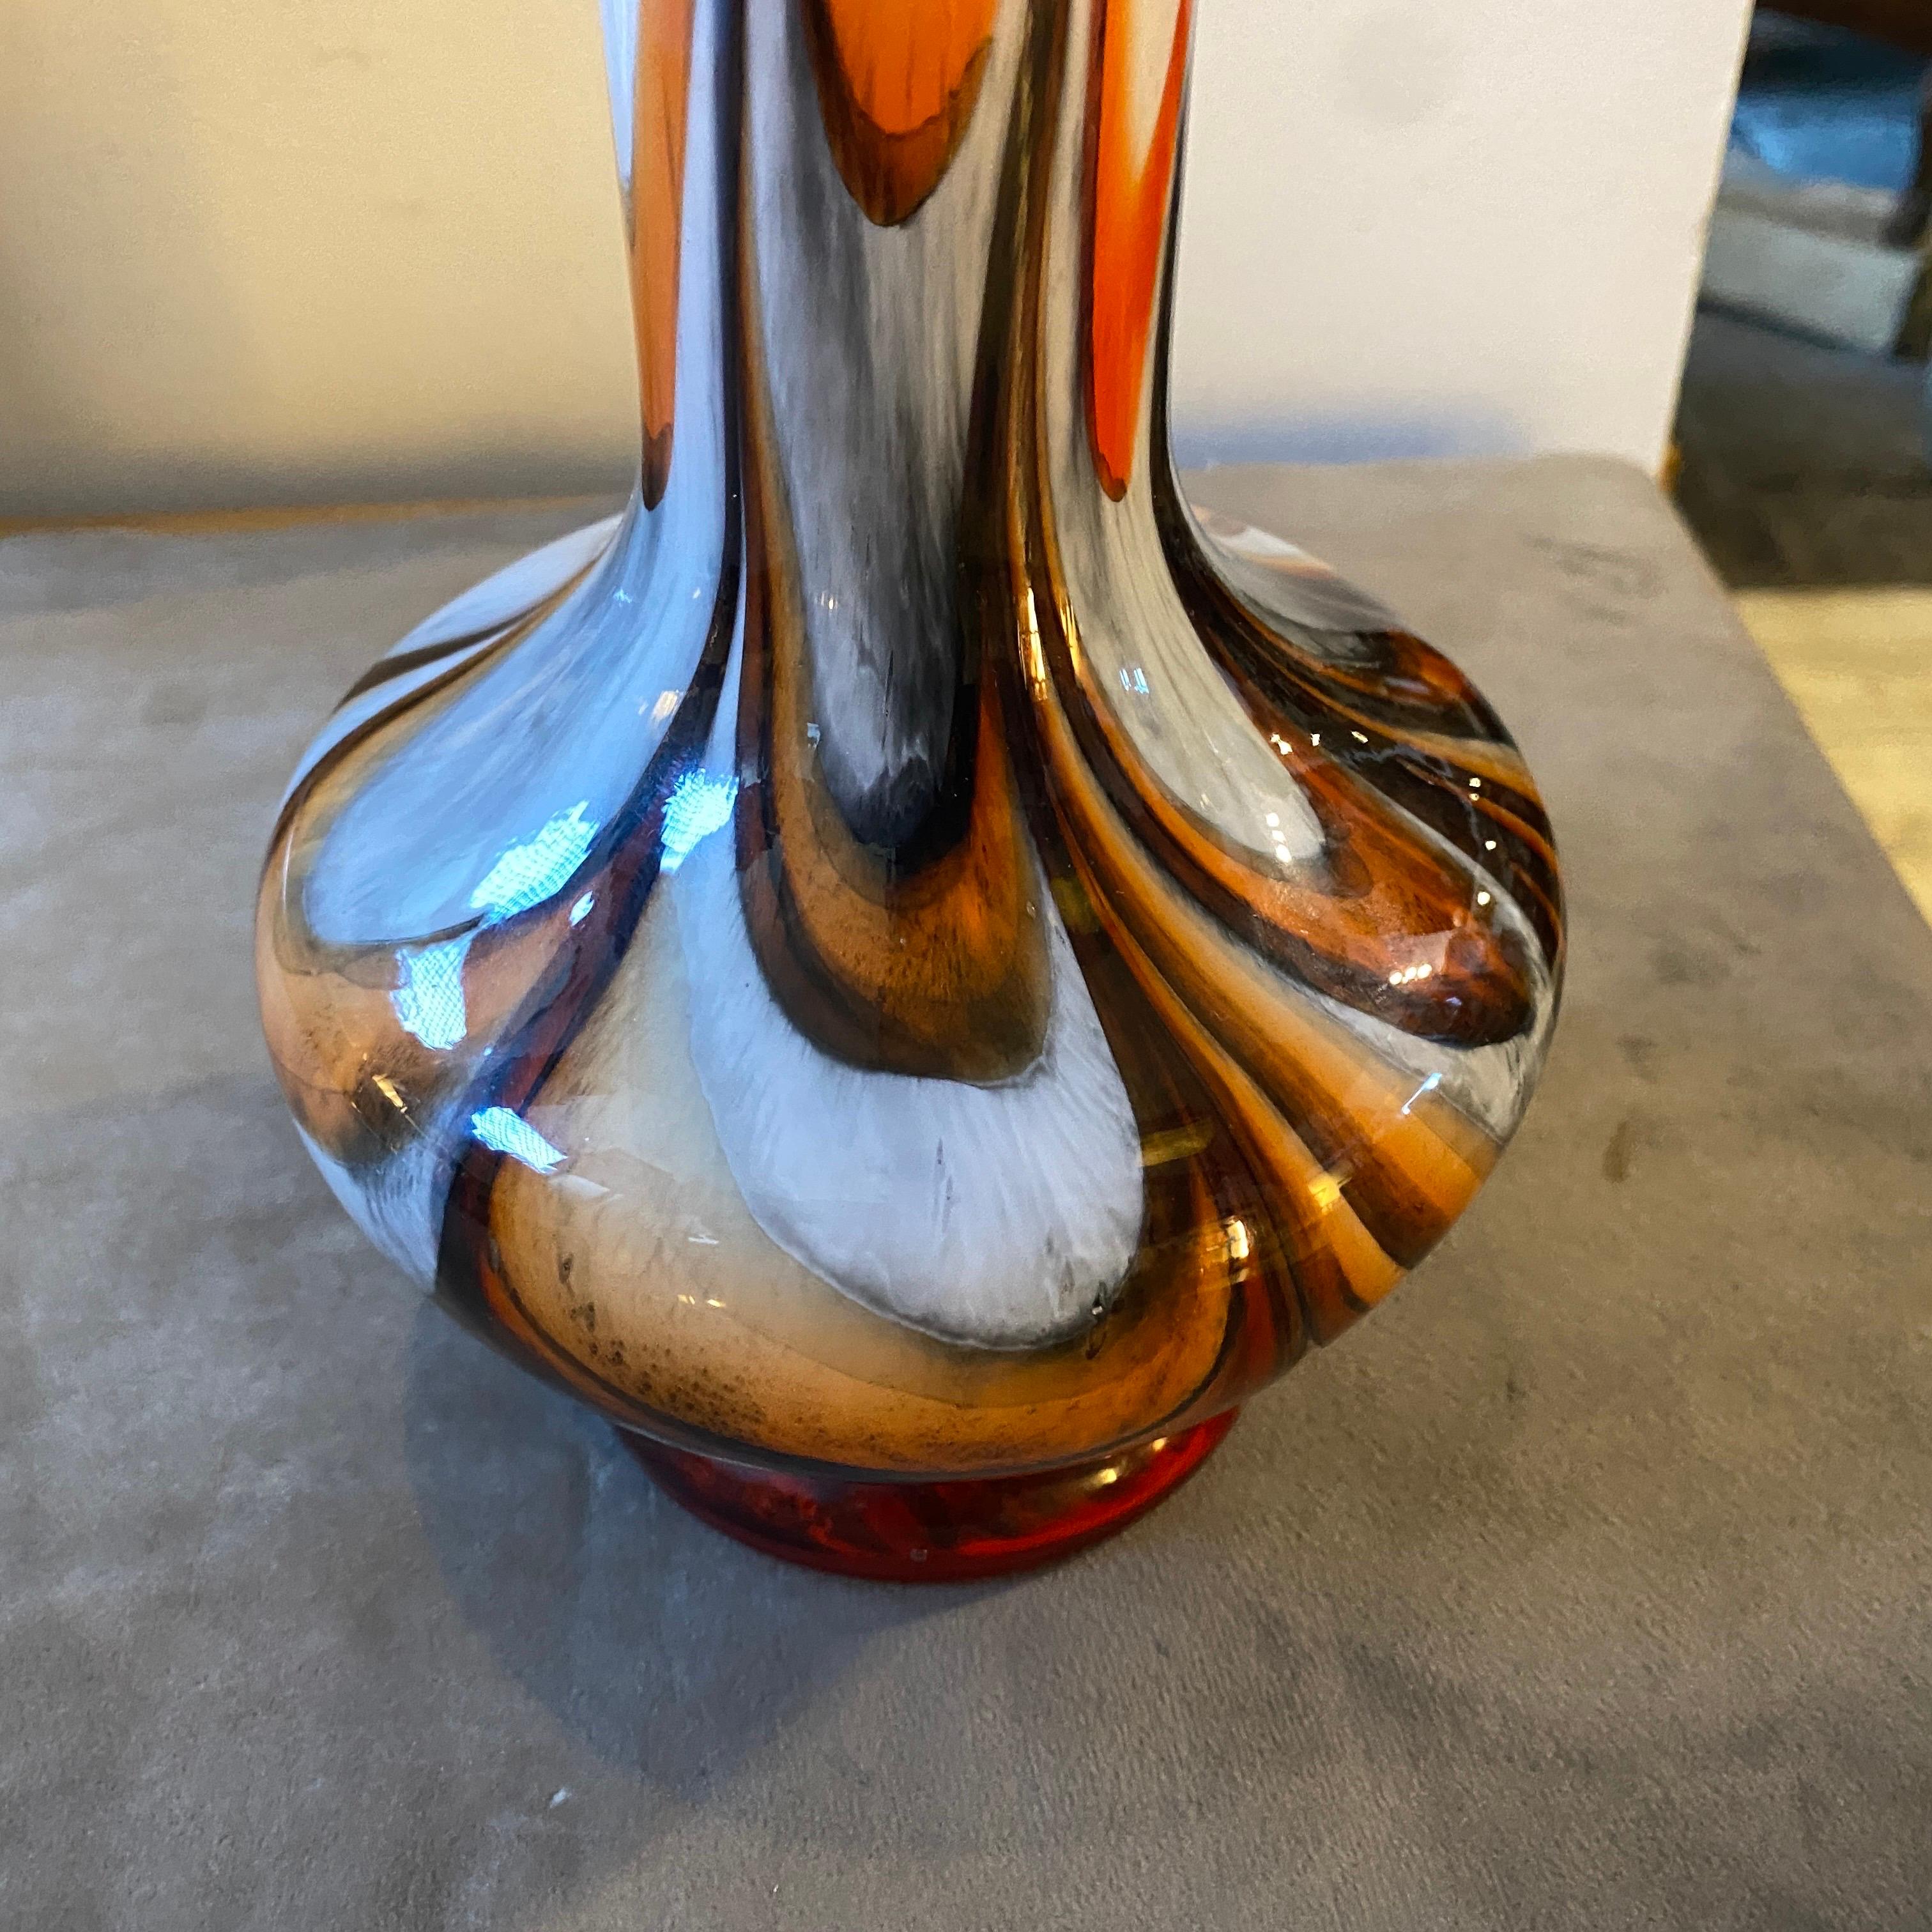 An iconic orange brown and black opaline glass vase designed and manufactured in Italy in lovely conditions. This Vase embodies the bold and futuristic design aesthetics characteristic of the Space Age era. Carlo Moretti, an Italian glassmaker, was